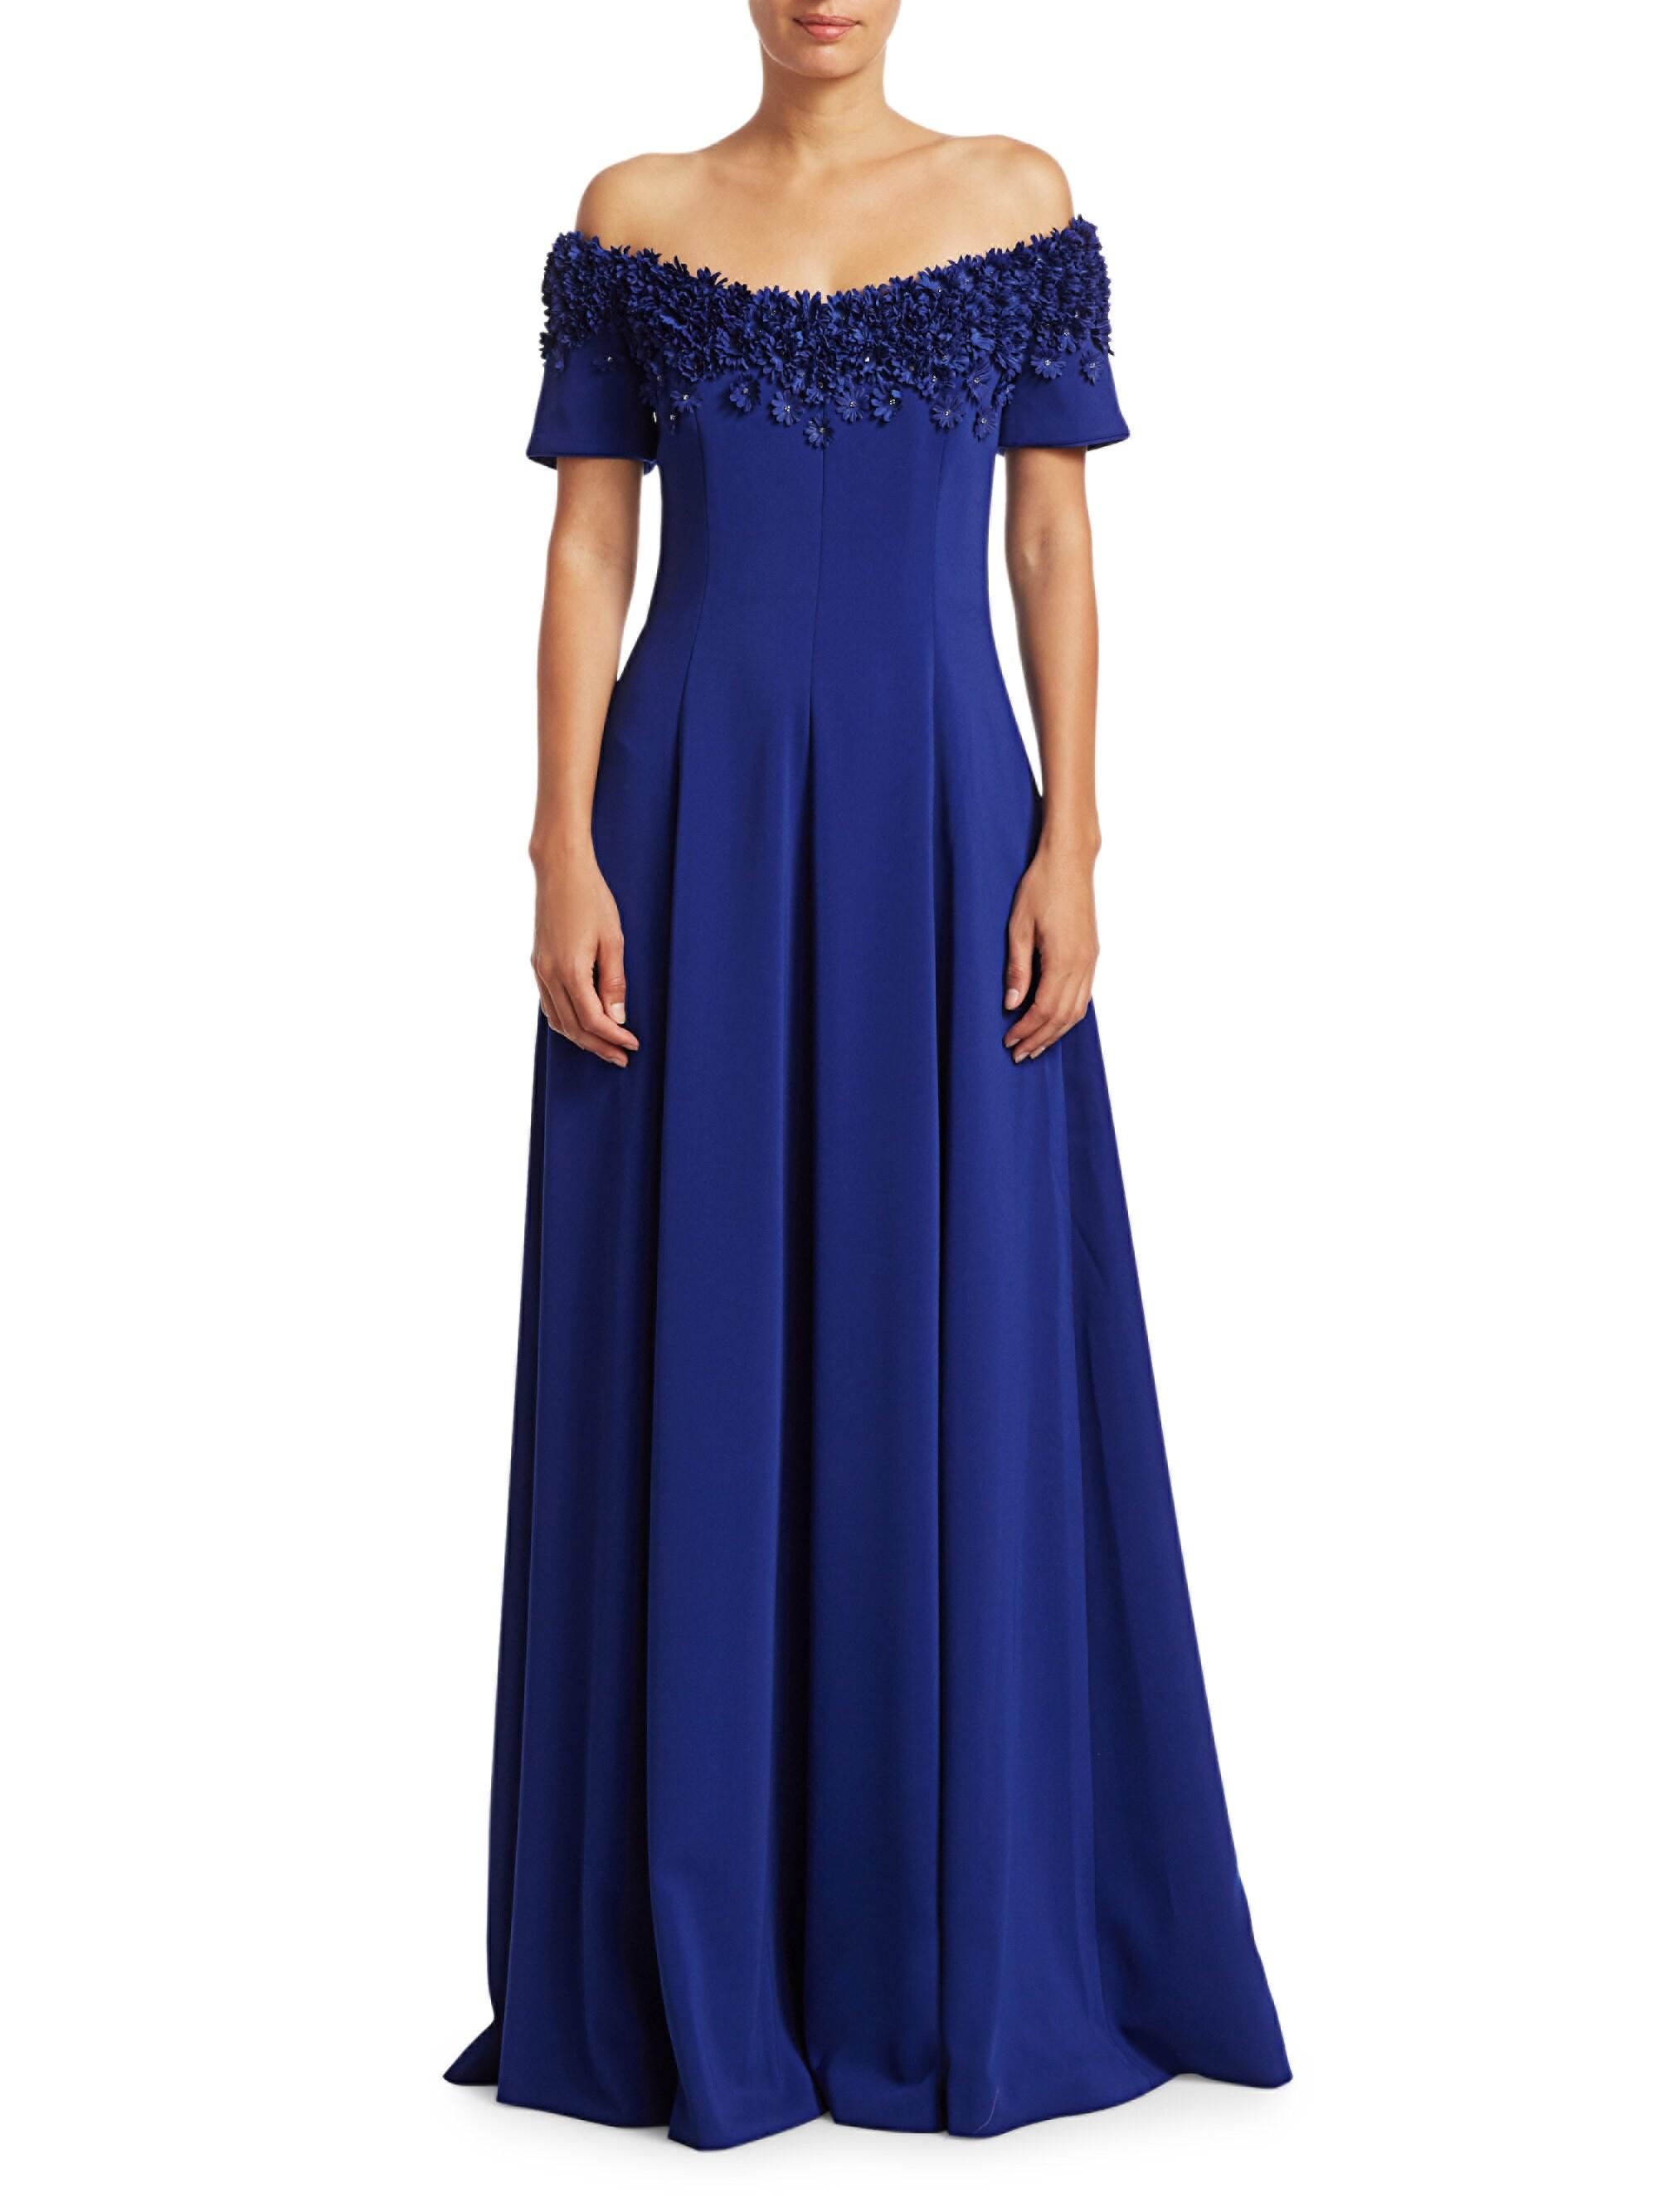 Catherine Regehr Aster Off-the-shoulder Floral Cluster Gown in Blue - Lyst